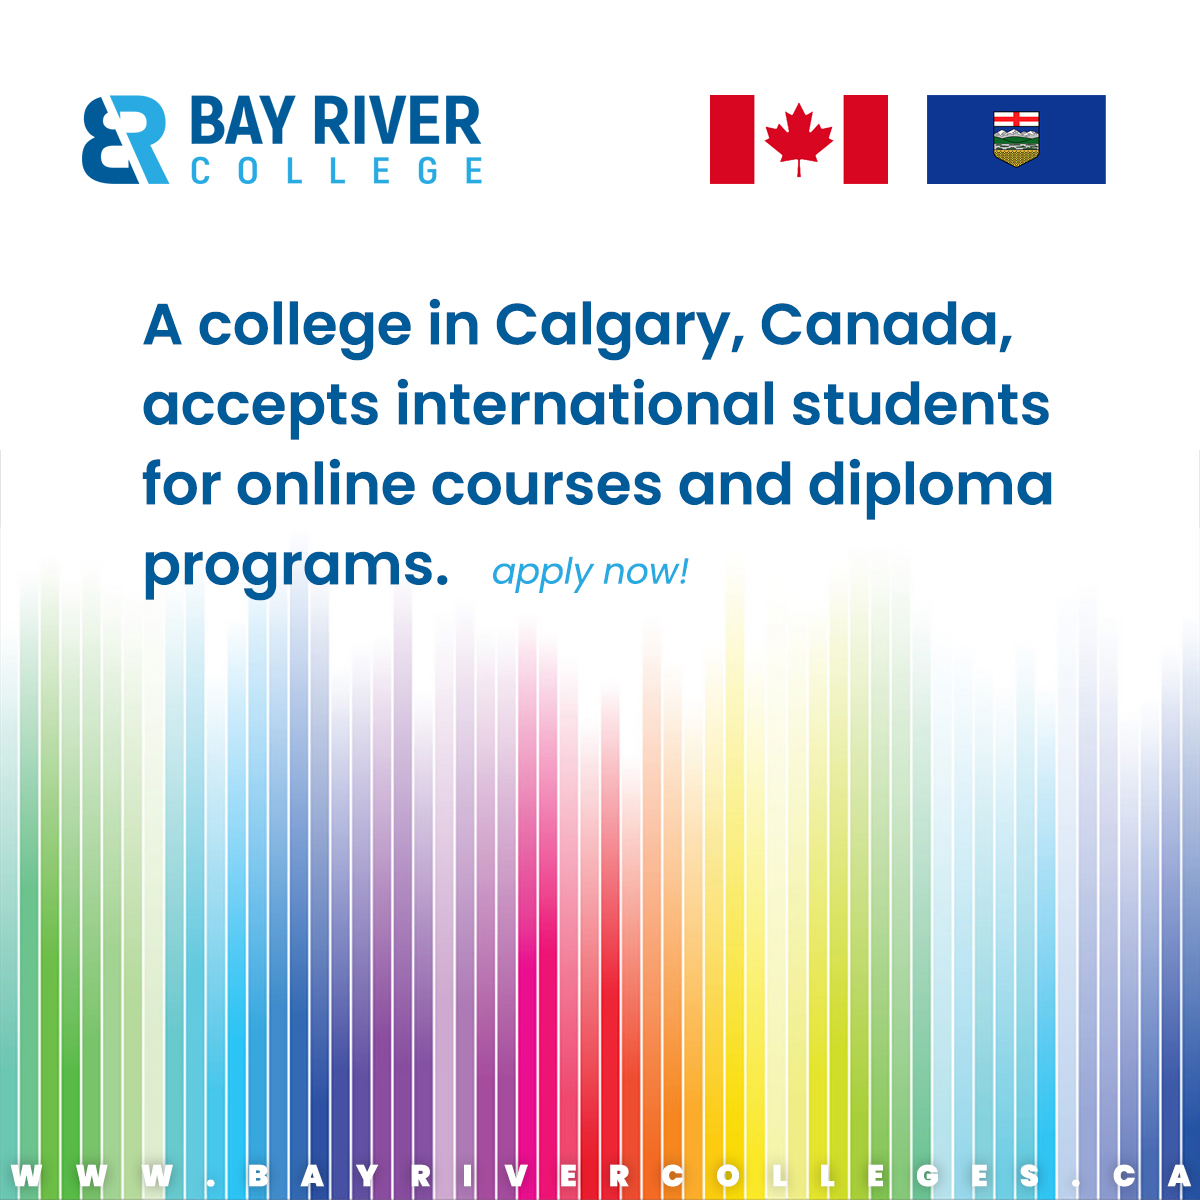 A college in #Canada is now welcoming international students to join various diploma programs 🌟 Apply today & achieve your academic dreams 📚 Explore programs & courses here: bayrivercolleges.ca

#DiplomaPrograms #College #CanadaStudyPermit #CanadaStudentVISA #Calgary #YYC